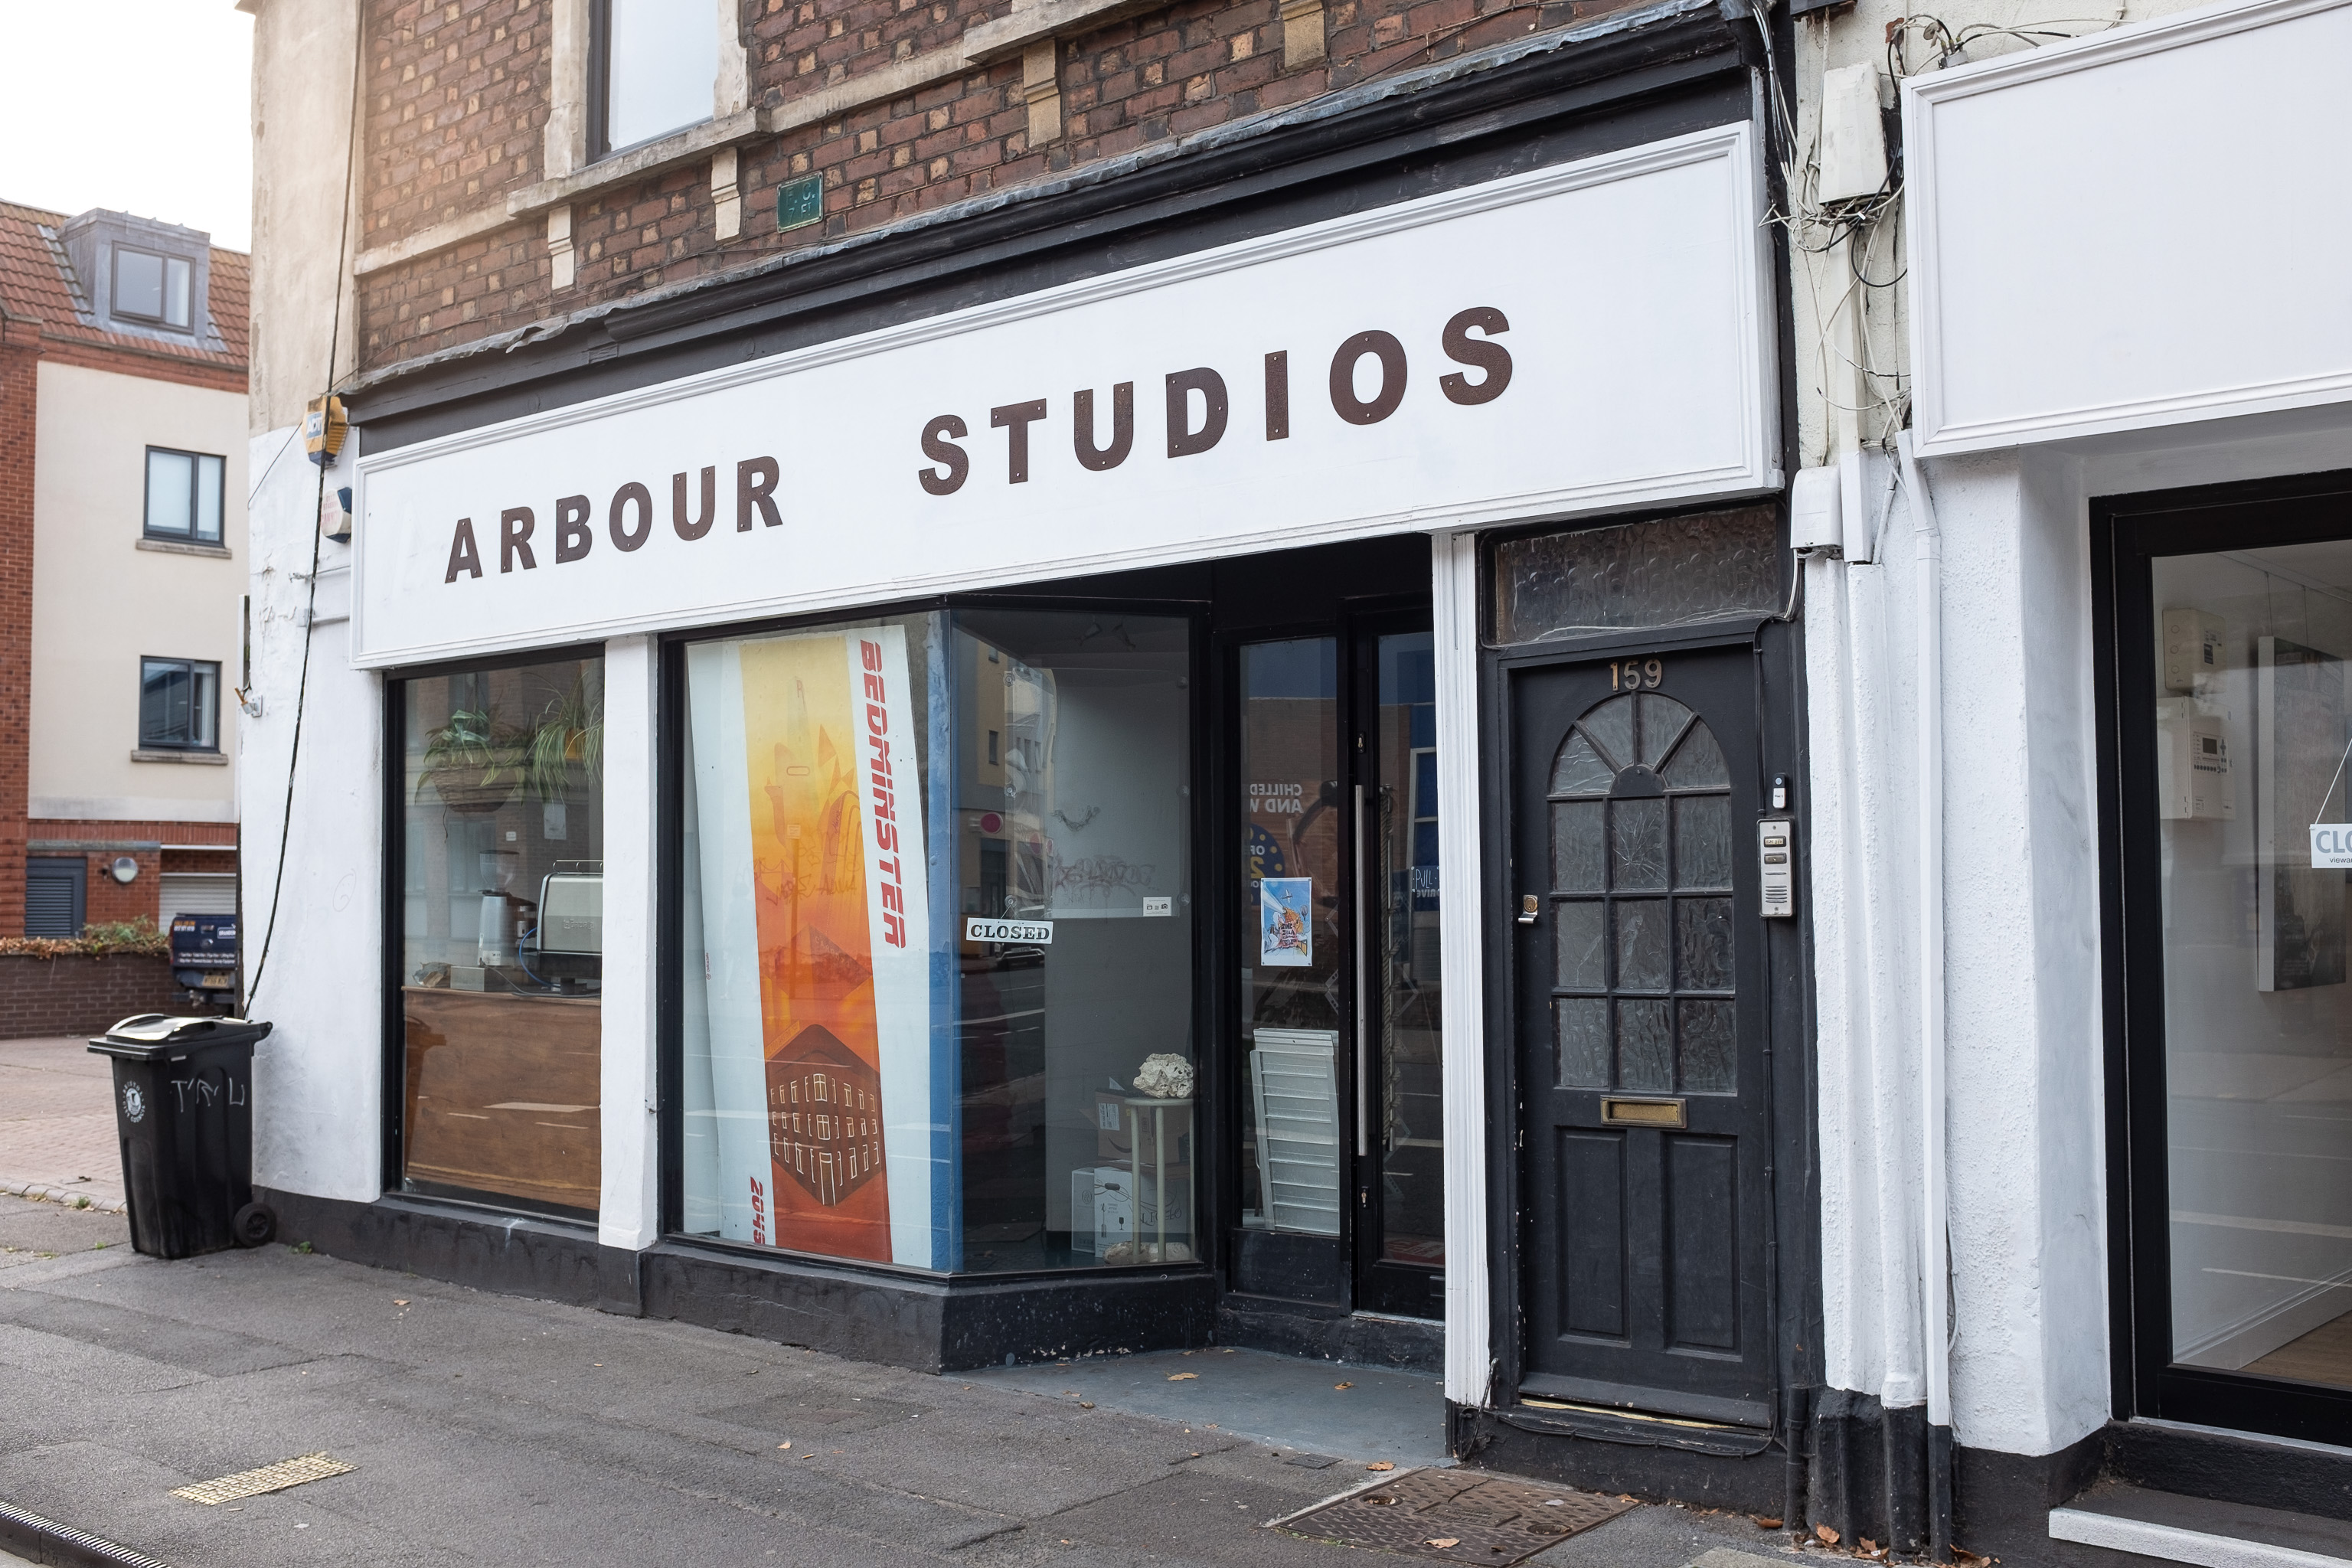 Arbour Studios
Aha! It's not just called "A". Maybe they had second thoughts about the font.
